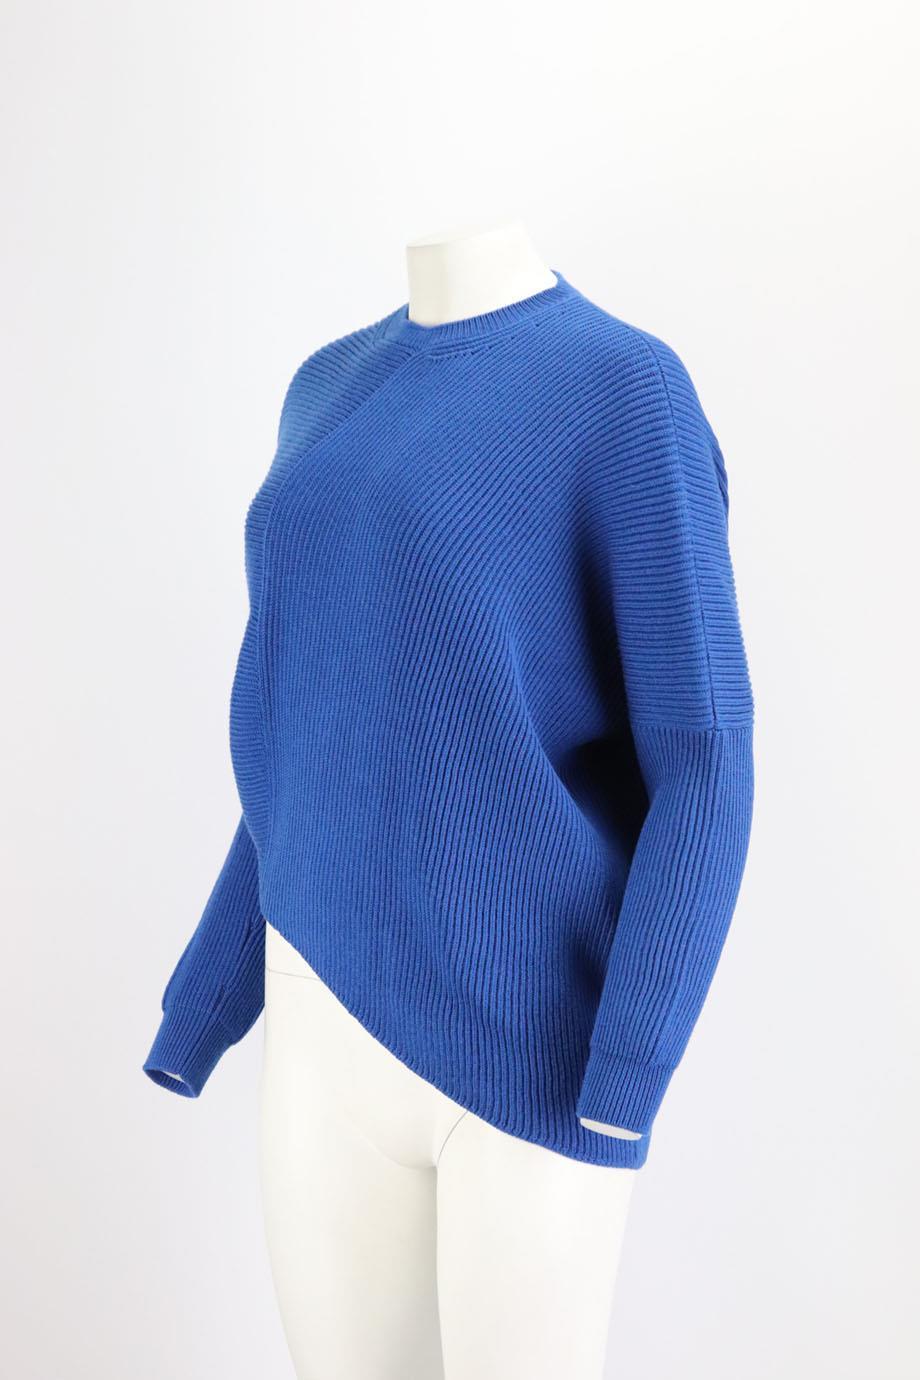 This ribbed sweater by Stella McCartney is spun from wool, it has wide trims and a slit at the asymmetric hem. Blue wool. Slips on. 100% Virgin wool. Size: Small (UK 8, US 4, FR 36, IT 40). Bust measures approx. 57 inches. Waist measures approx. 44